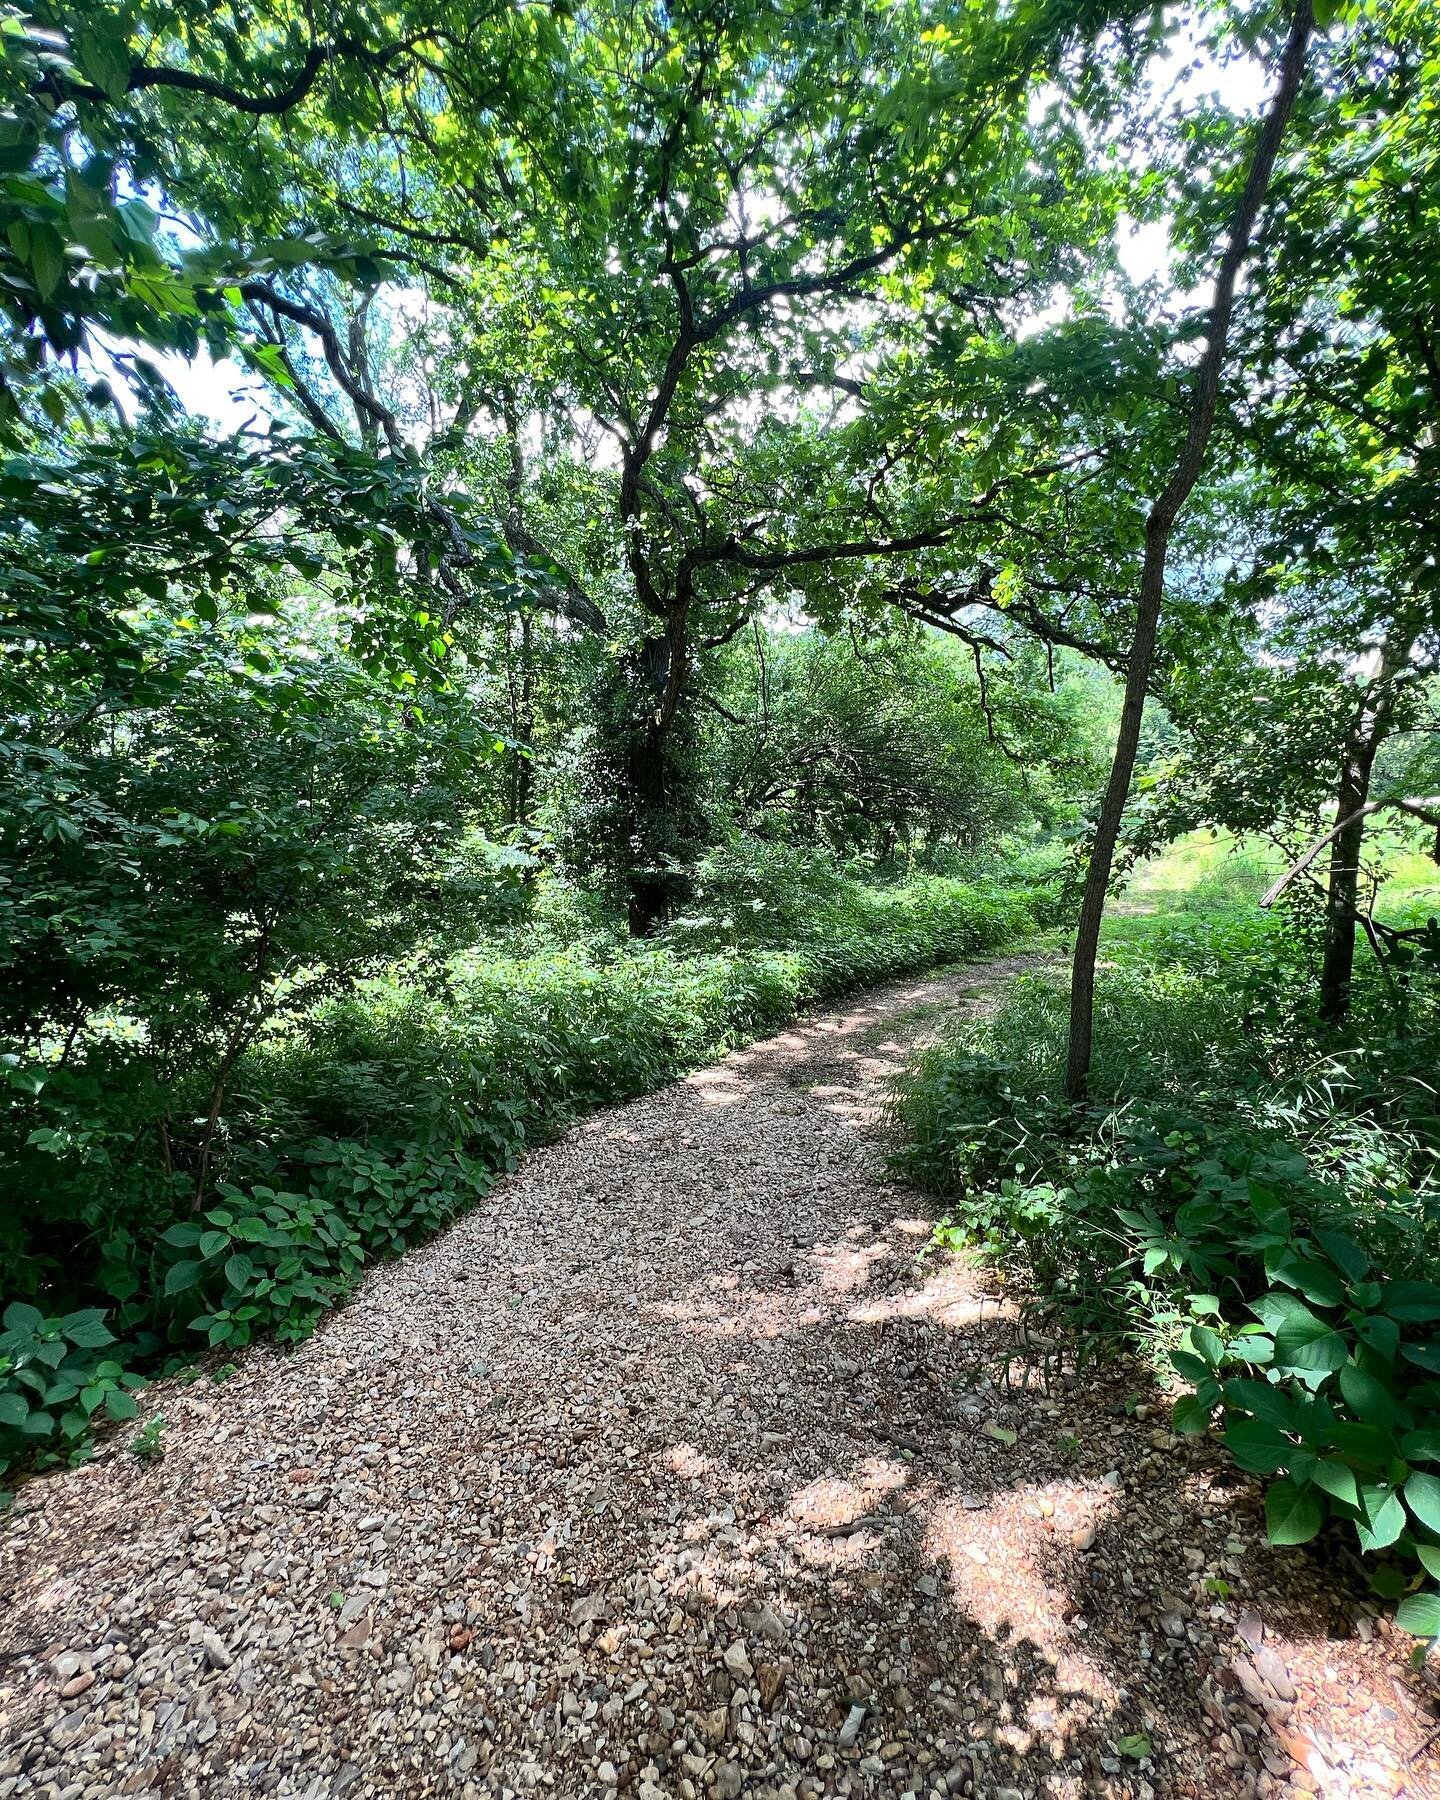 The path to the creek

One of our favorite things to do is to spend time on the Little Sugar Creek. We haven&rsquo;t gone one summer in our lives without dipping our toes in this little piece of heaven.

Small mouth bass, herons, crawdads, turtles, d